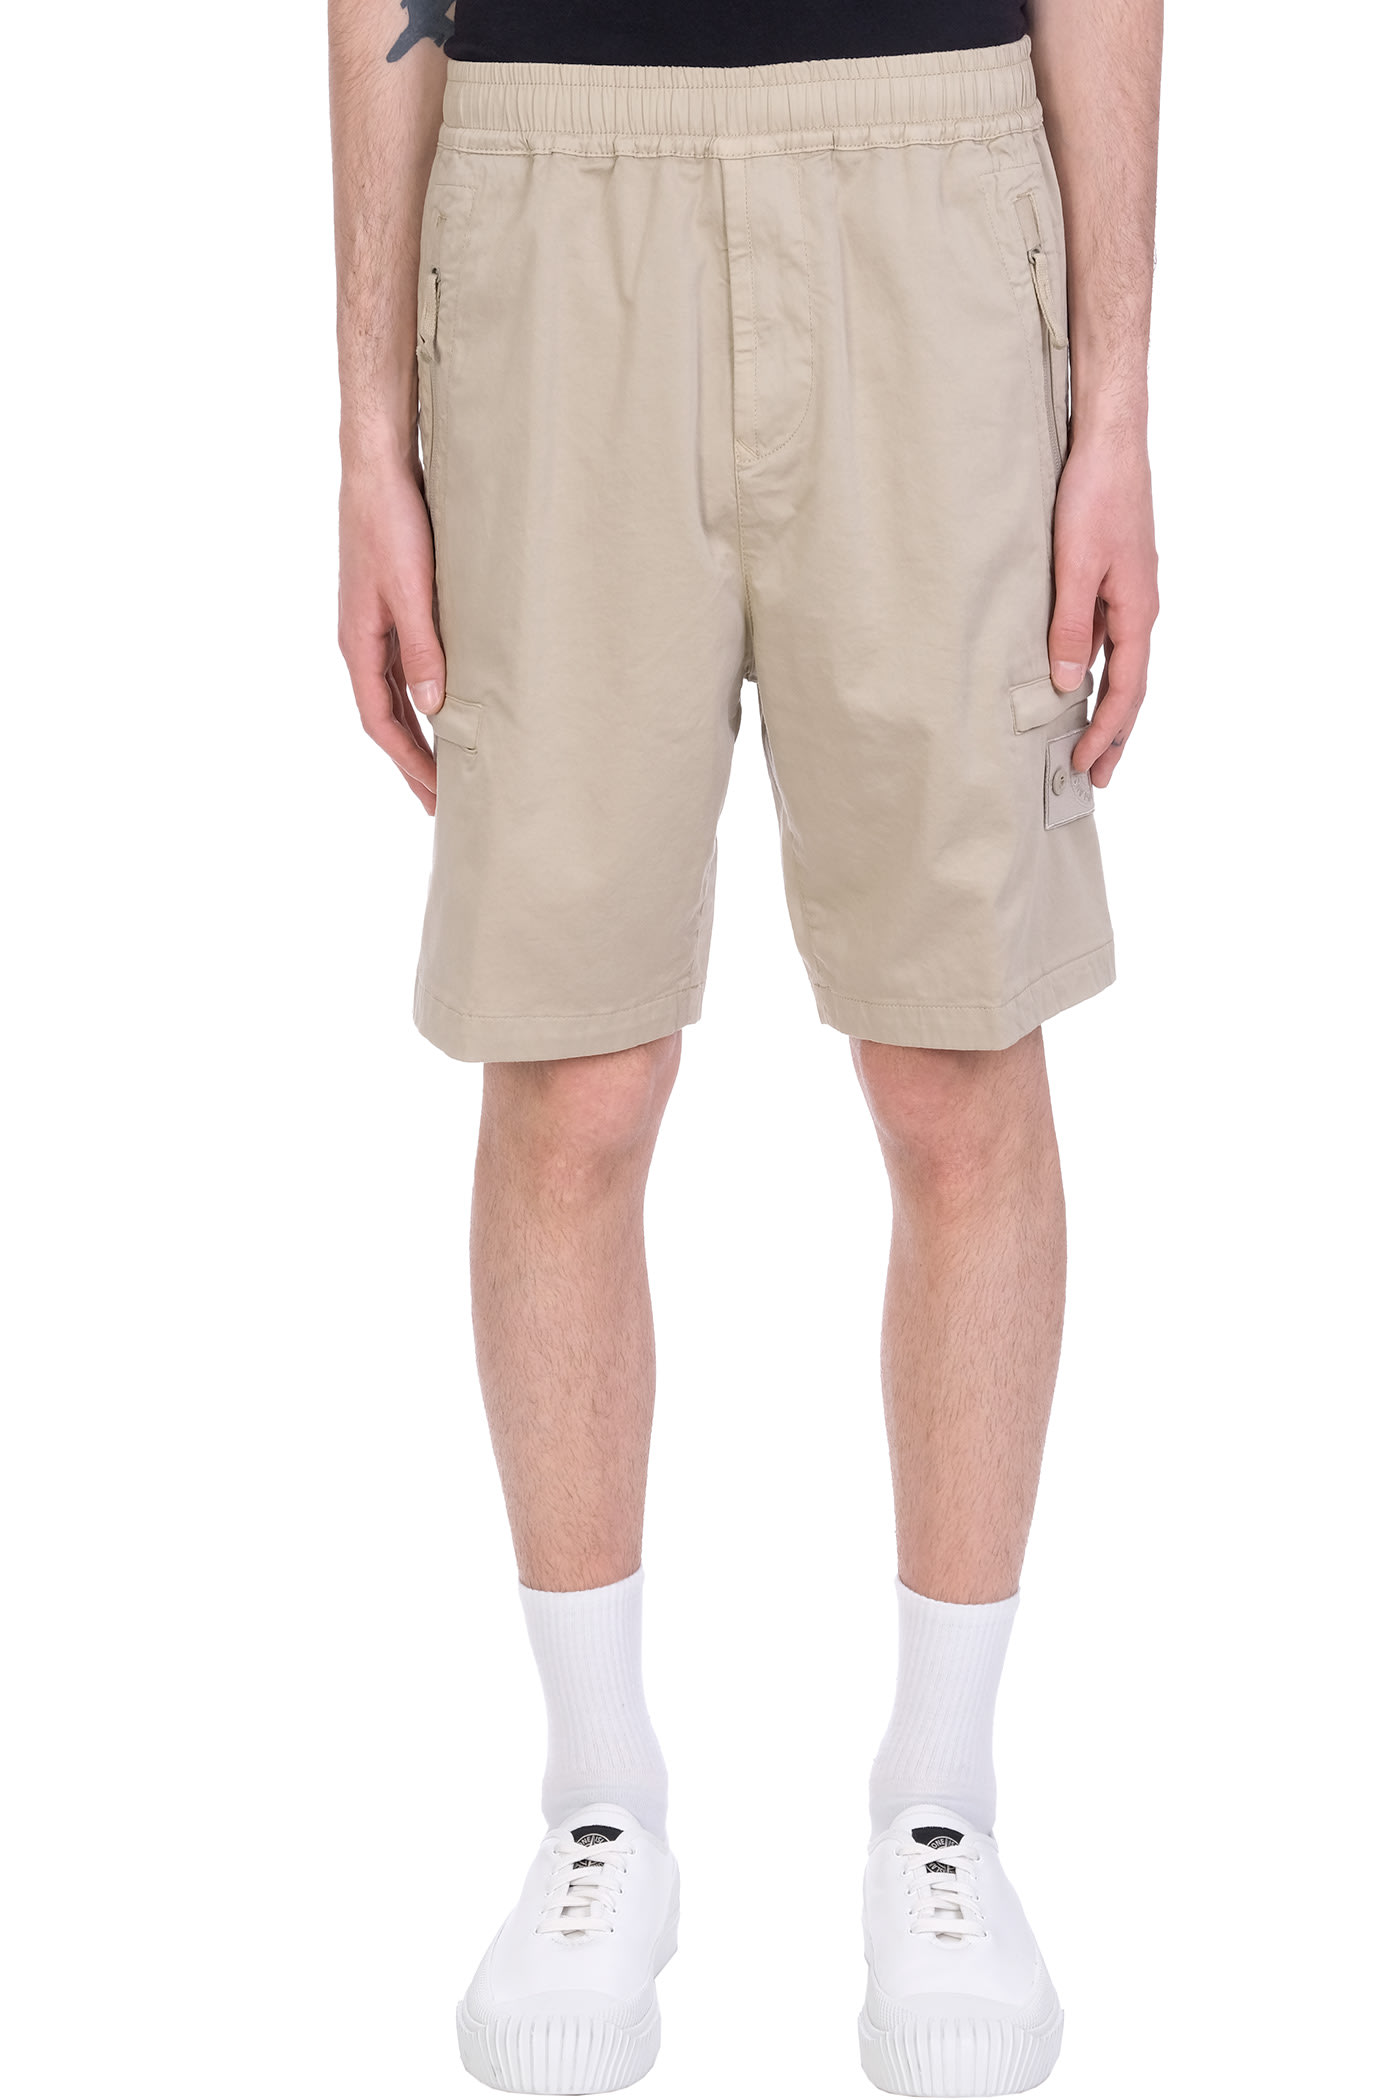 Stone Island Shorts In Beige Cotton And Nylon